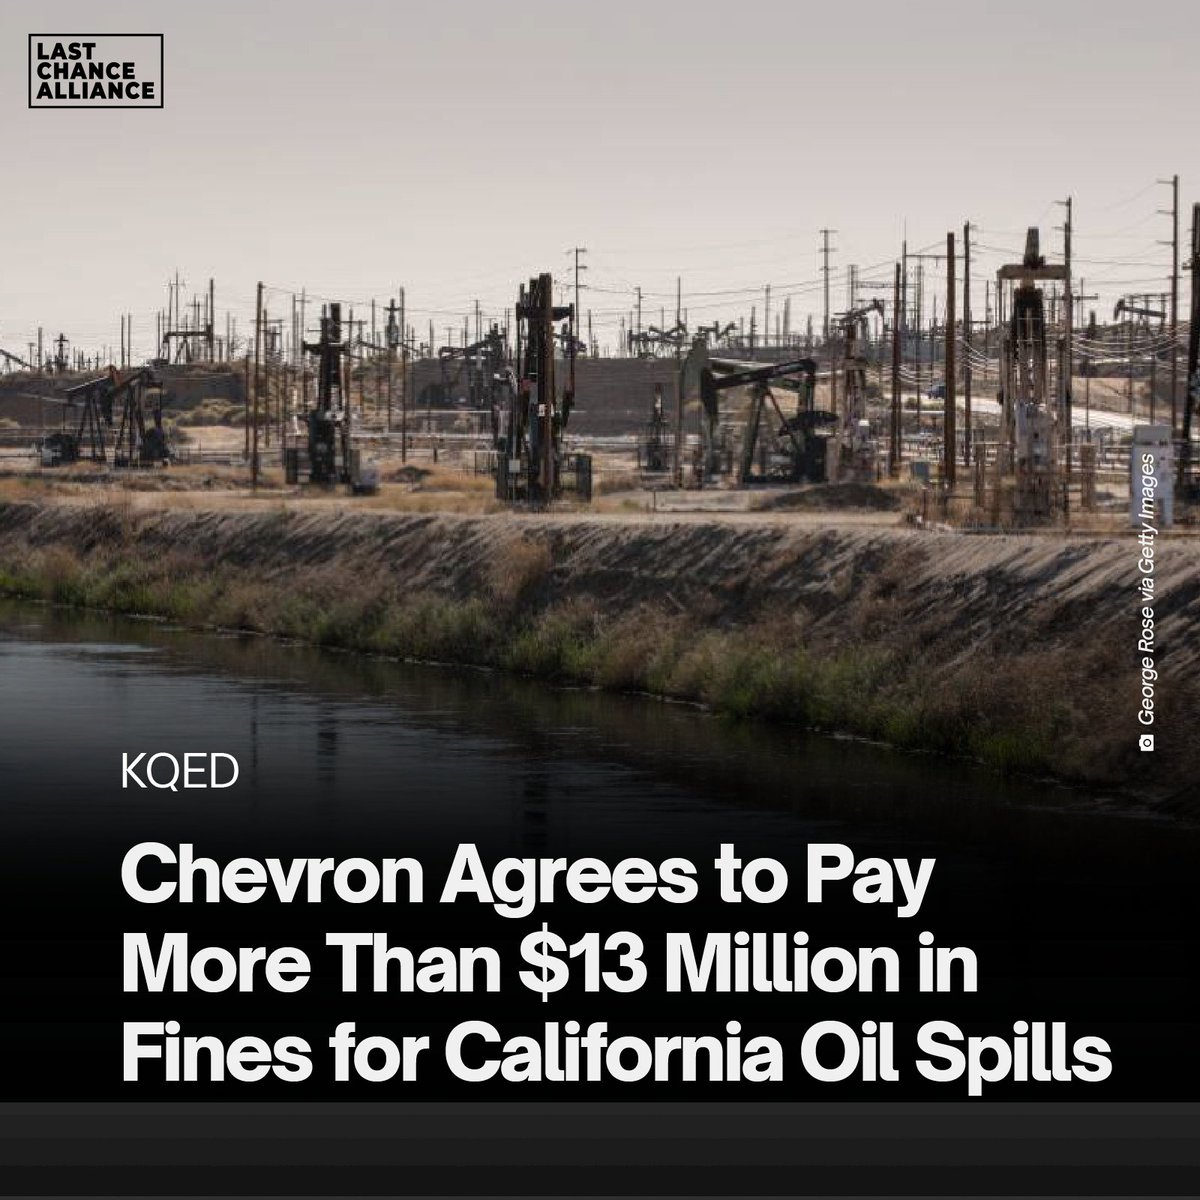 It’s 👏 about 👏 damn 👏 time. Five years after dumping 800,000 gallons of oil in Kern County, Chevron has been forced to pay up. We must keep holding them accountable.